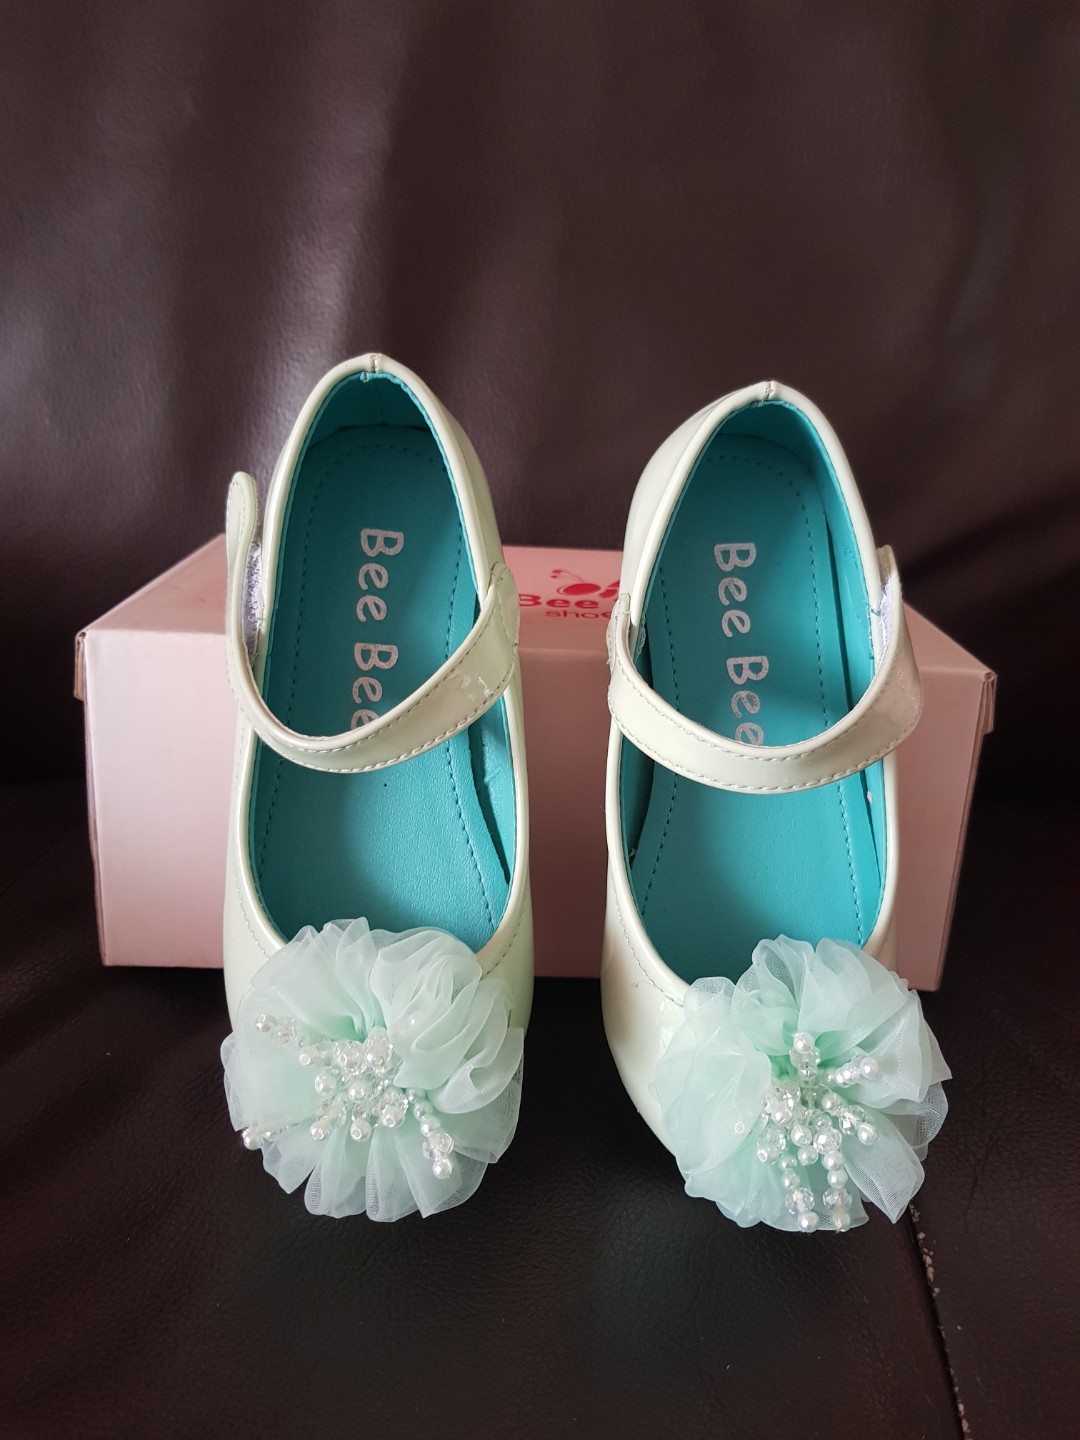 Brand new mint green shoes for girls 